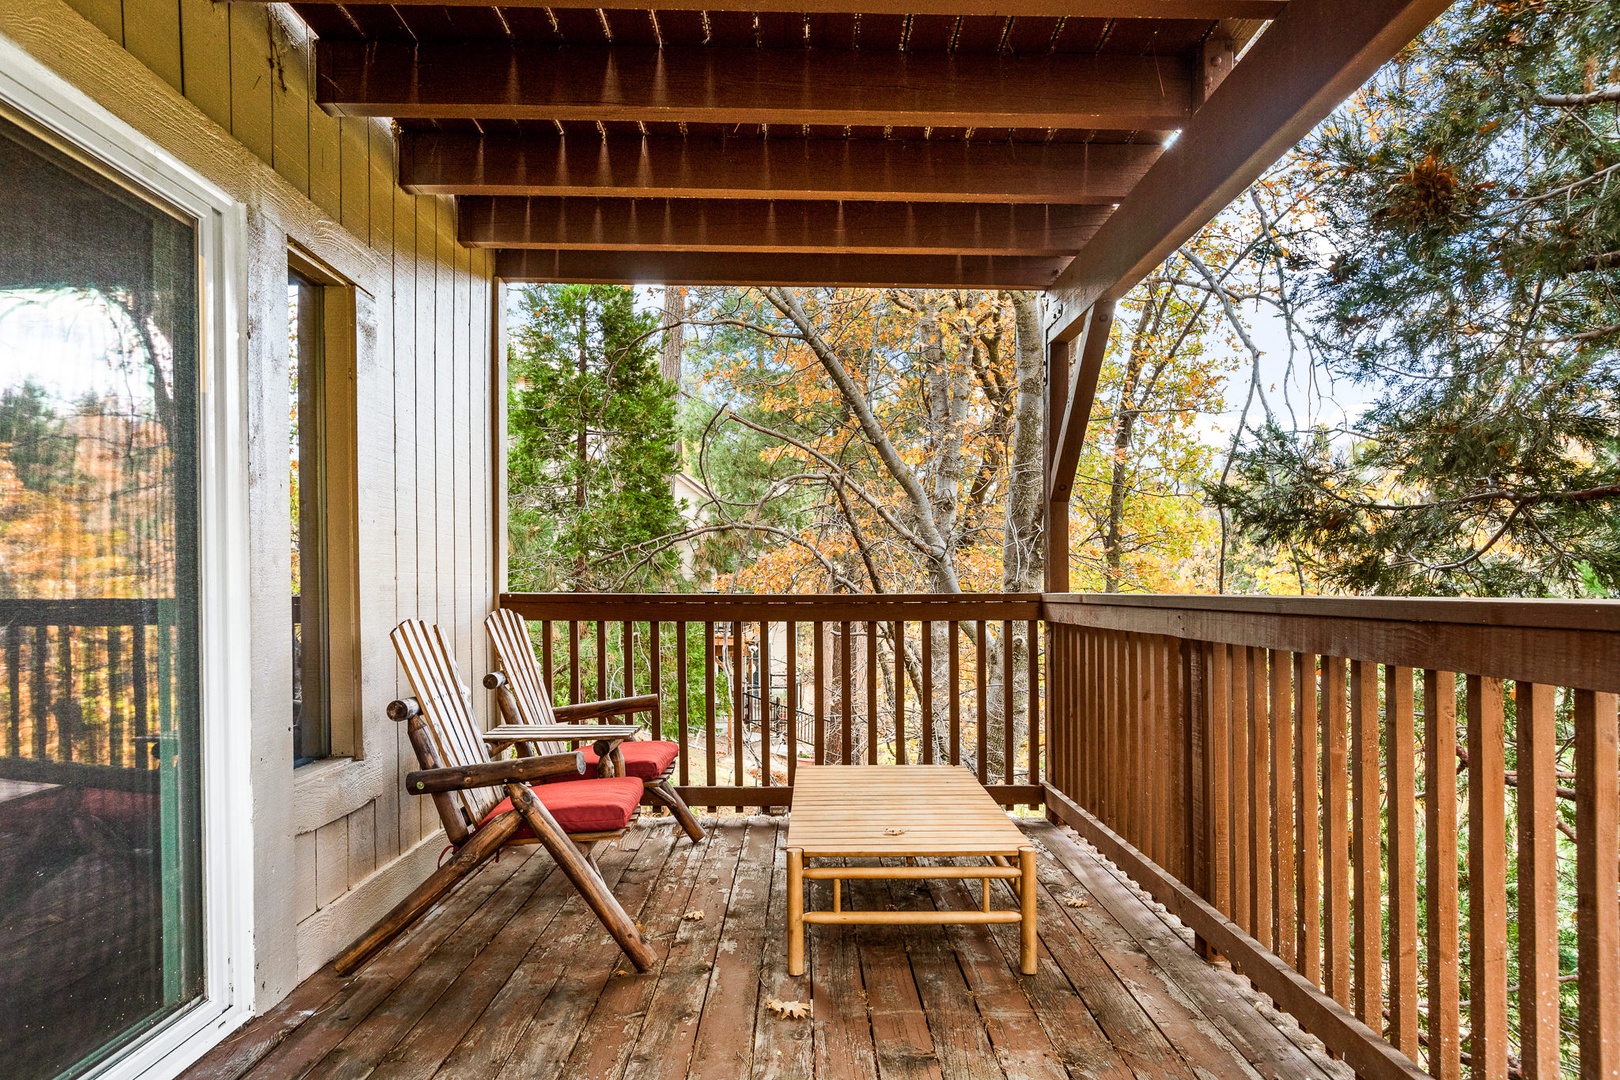 Step out onto the lower-level deck & take in the fresh air